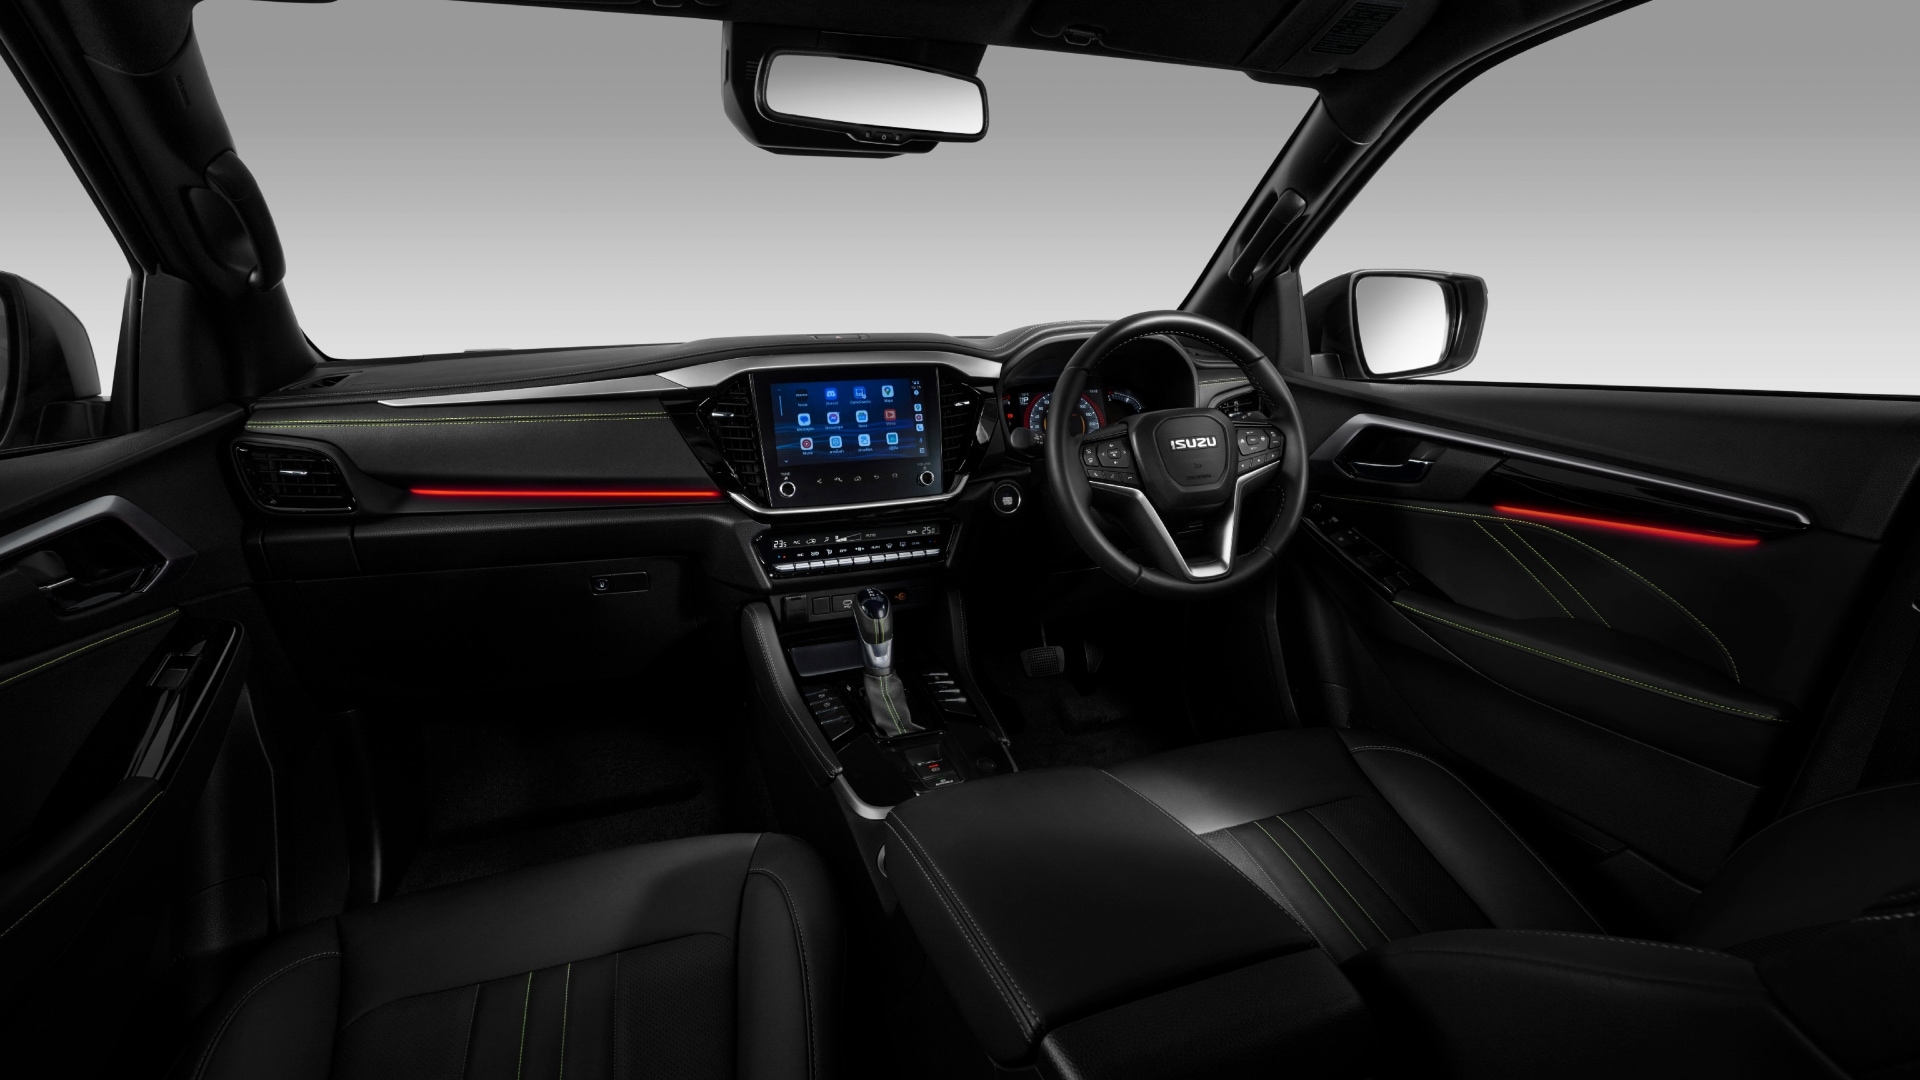 The Isuzu MU-X facelift gets a new 7-inch digital instrument console while the updated infotainment system now supports wireless Apple CarPlay and Android Auto